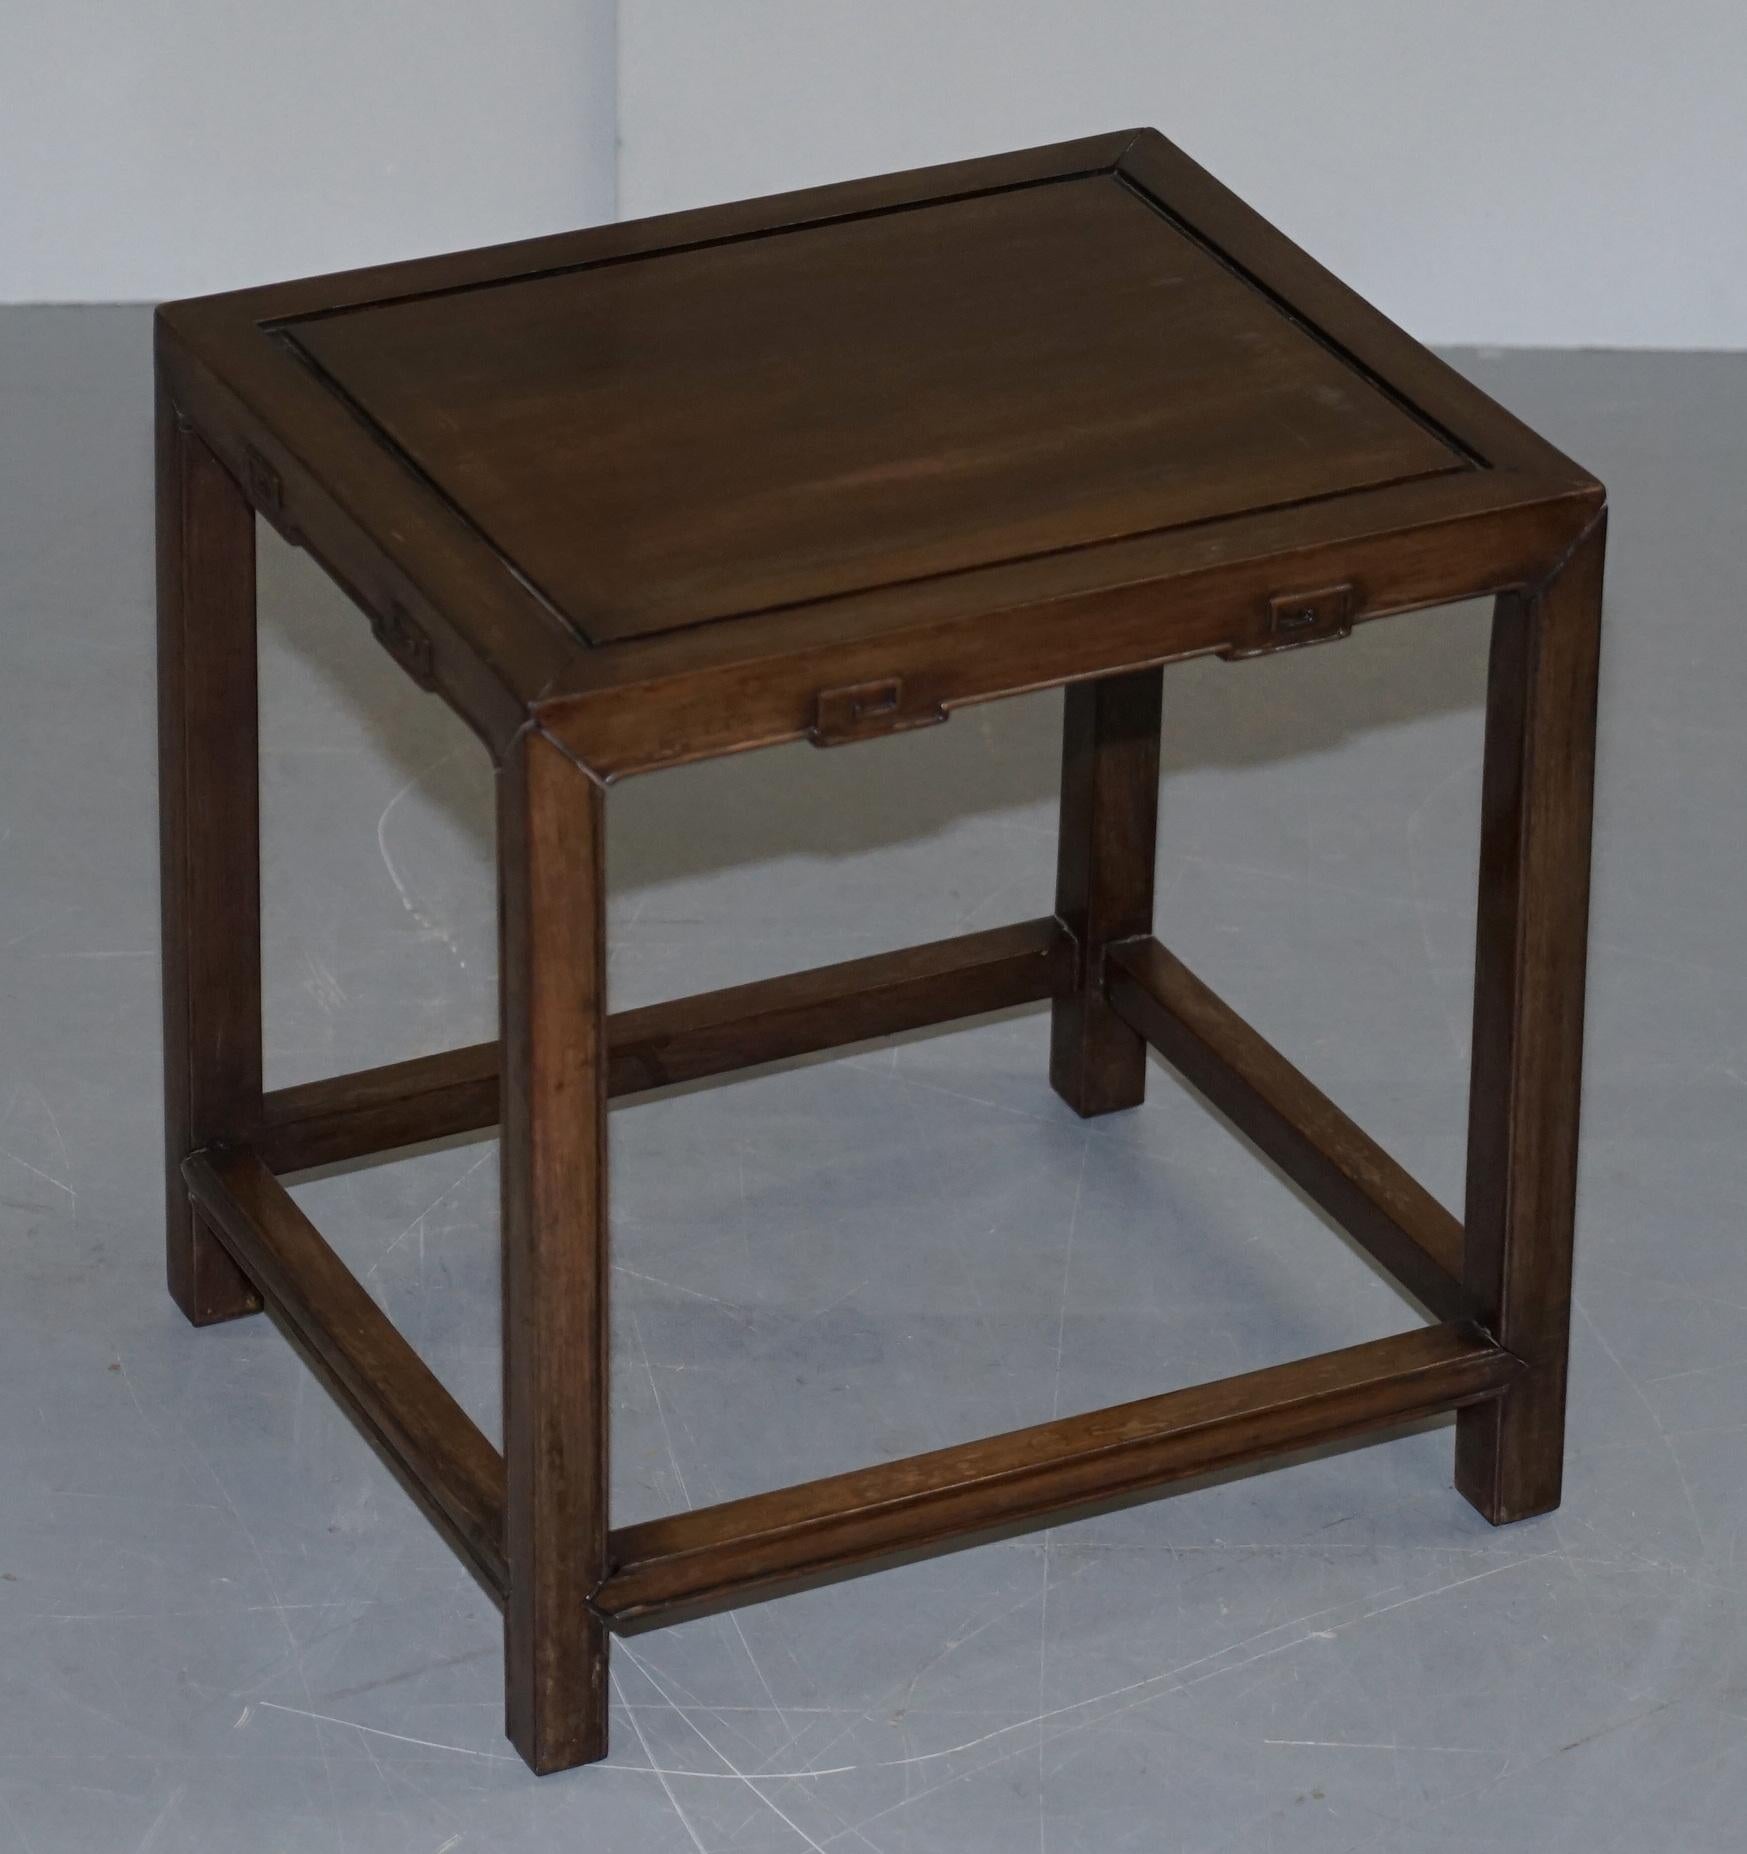 We delighted to offer for sale this stunning pair of original antique circa 1860 Chinese side tables

A very well made and elegant pair of Chinese side tables, they look to be in teak but they could be light rosewood, I’m really not sure

The